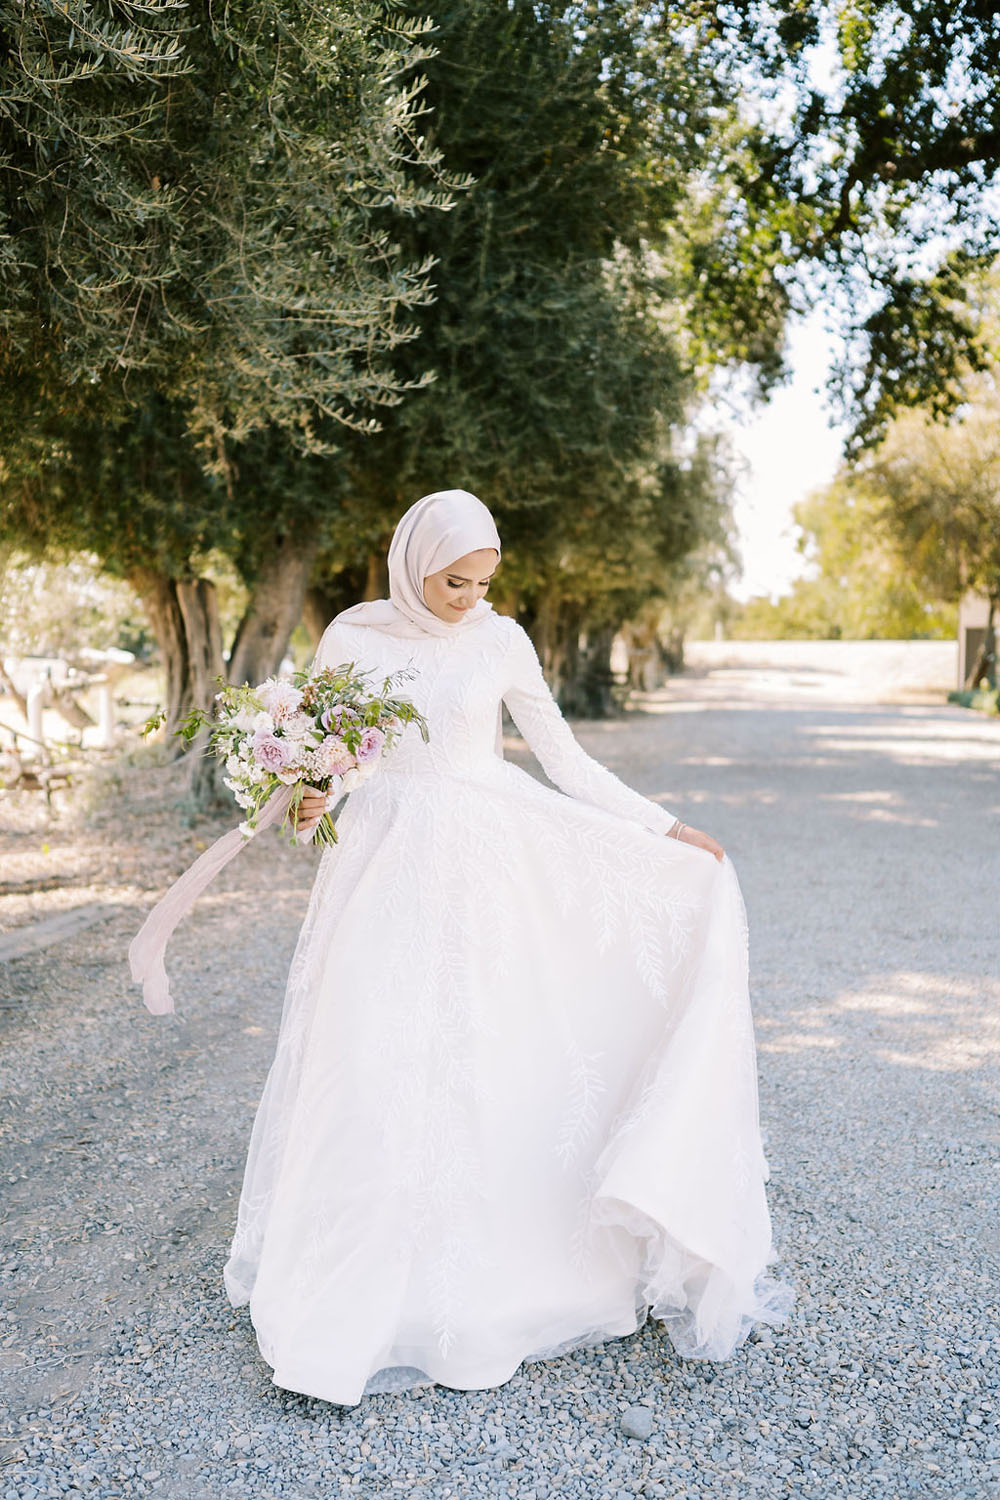 Chic summer wedding with a nod to Palestinian culture